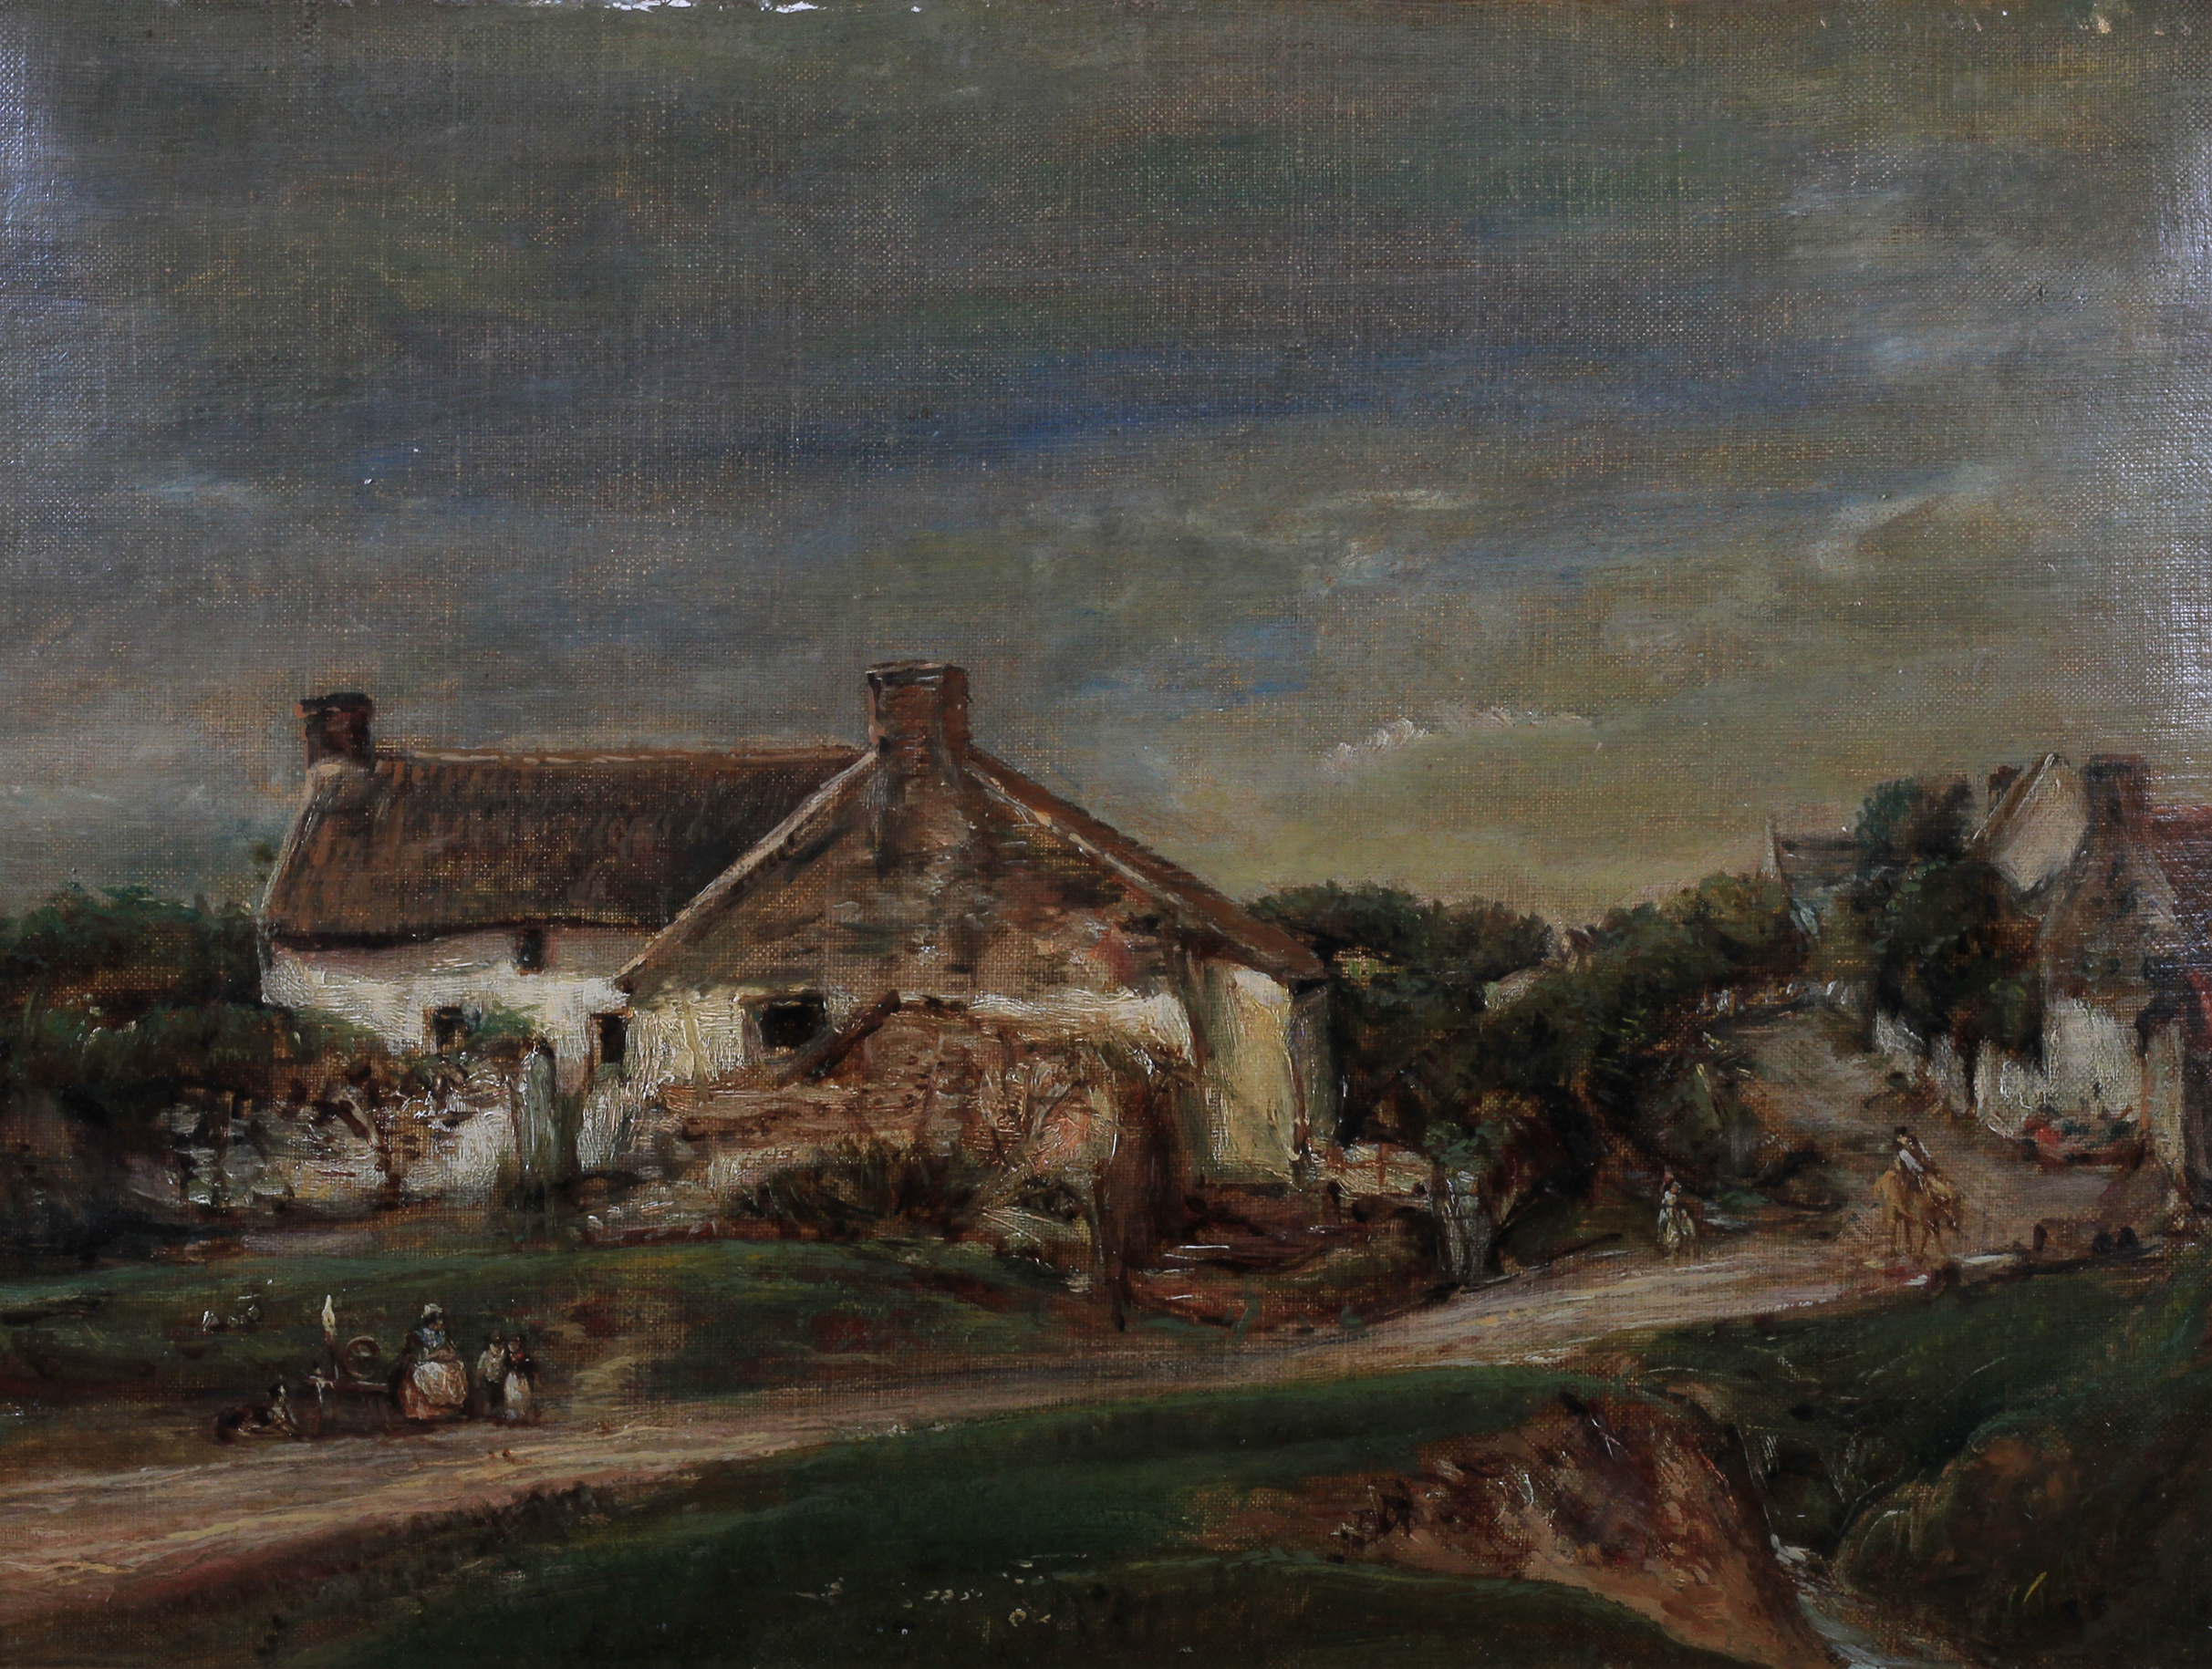 English School, 19th century, Hamlet with countrywoman and her spinning wheel beside the road, oil